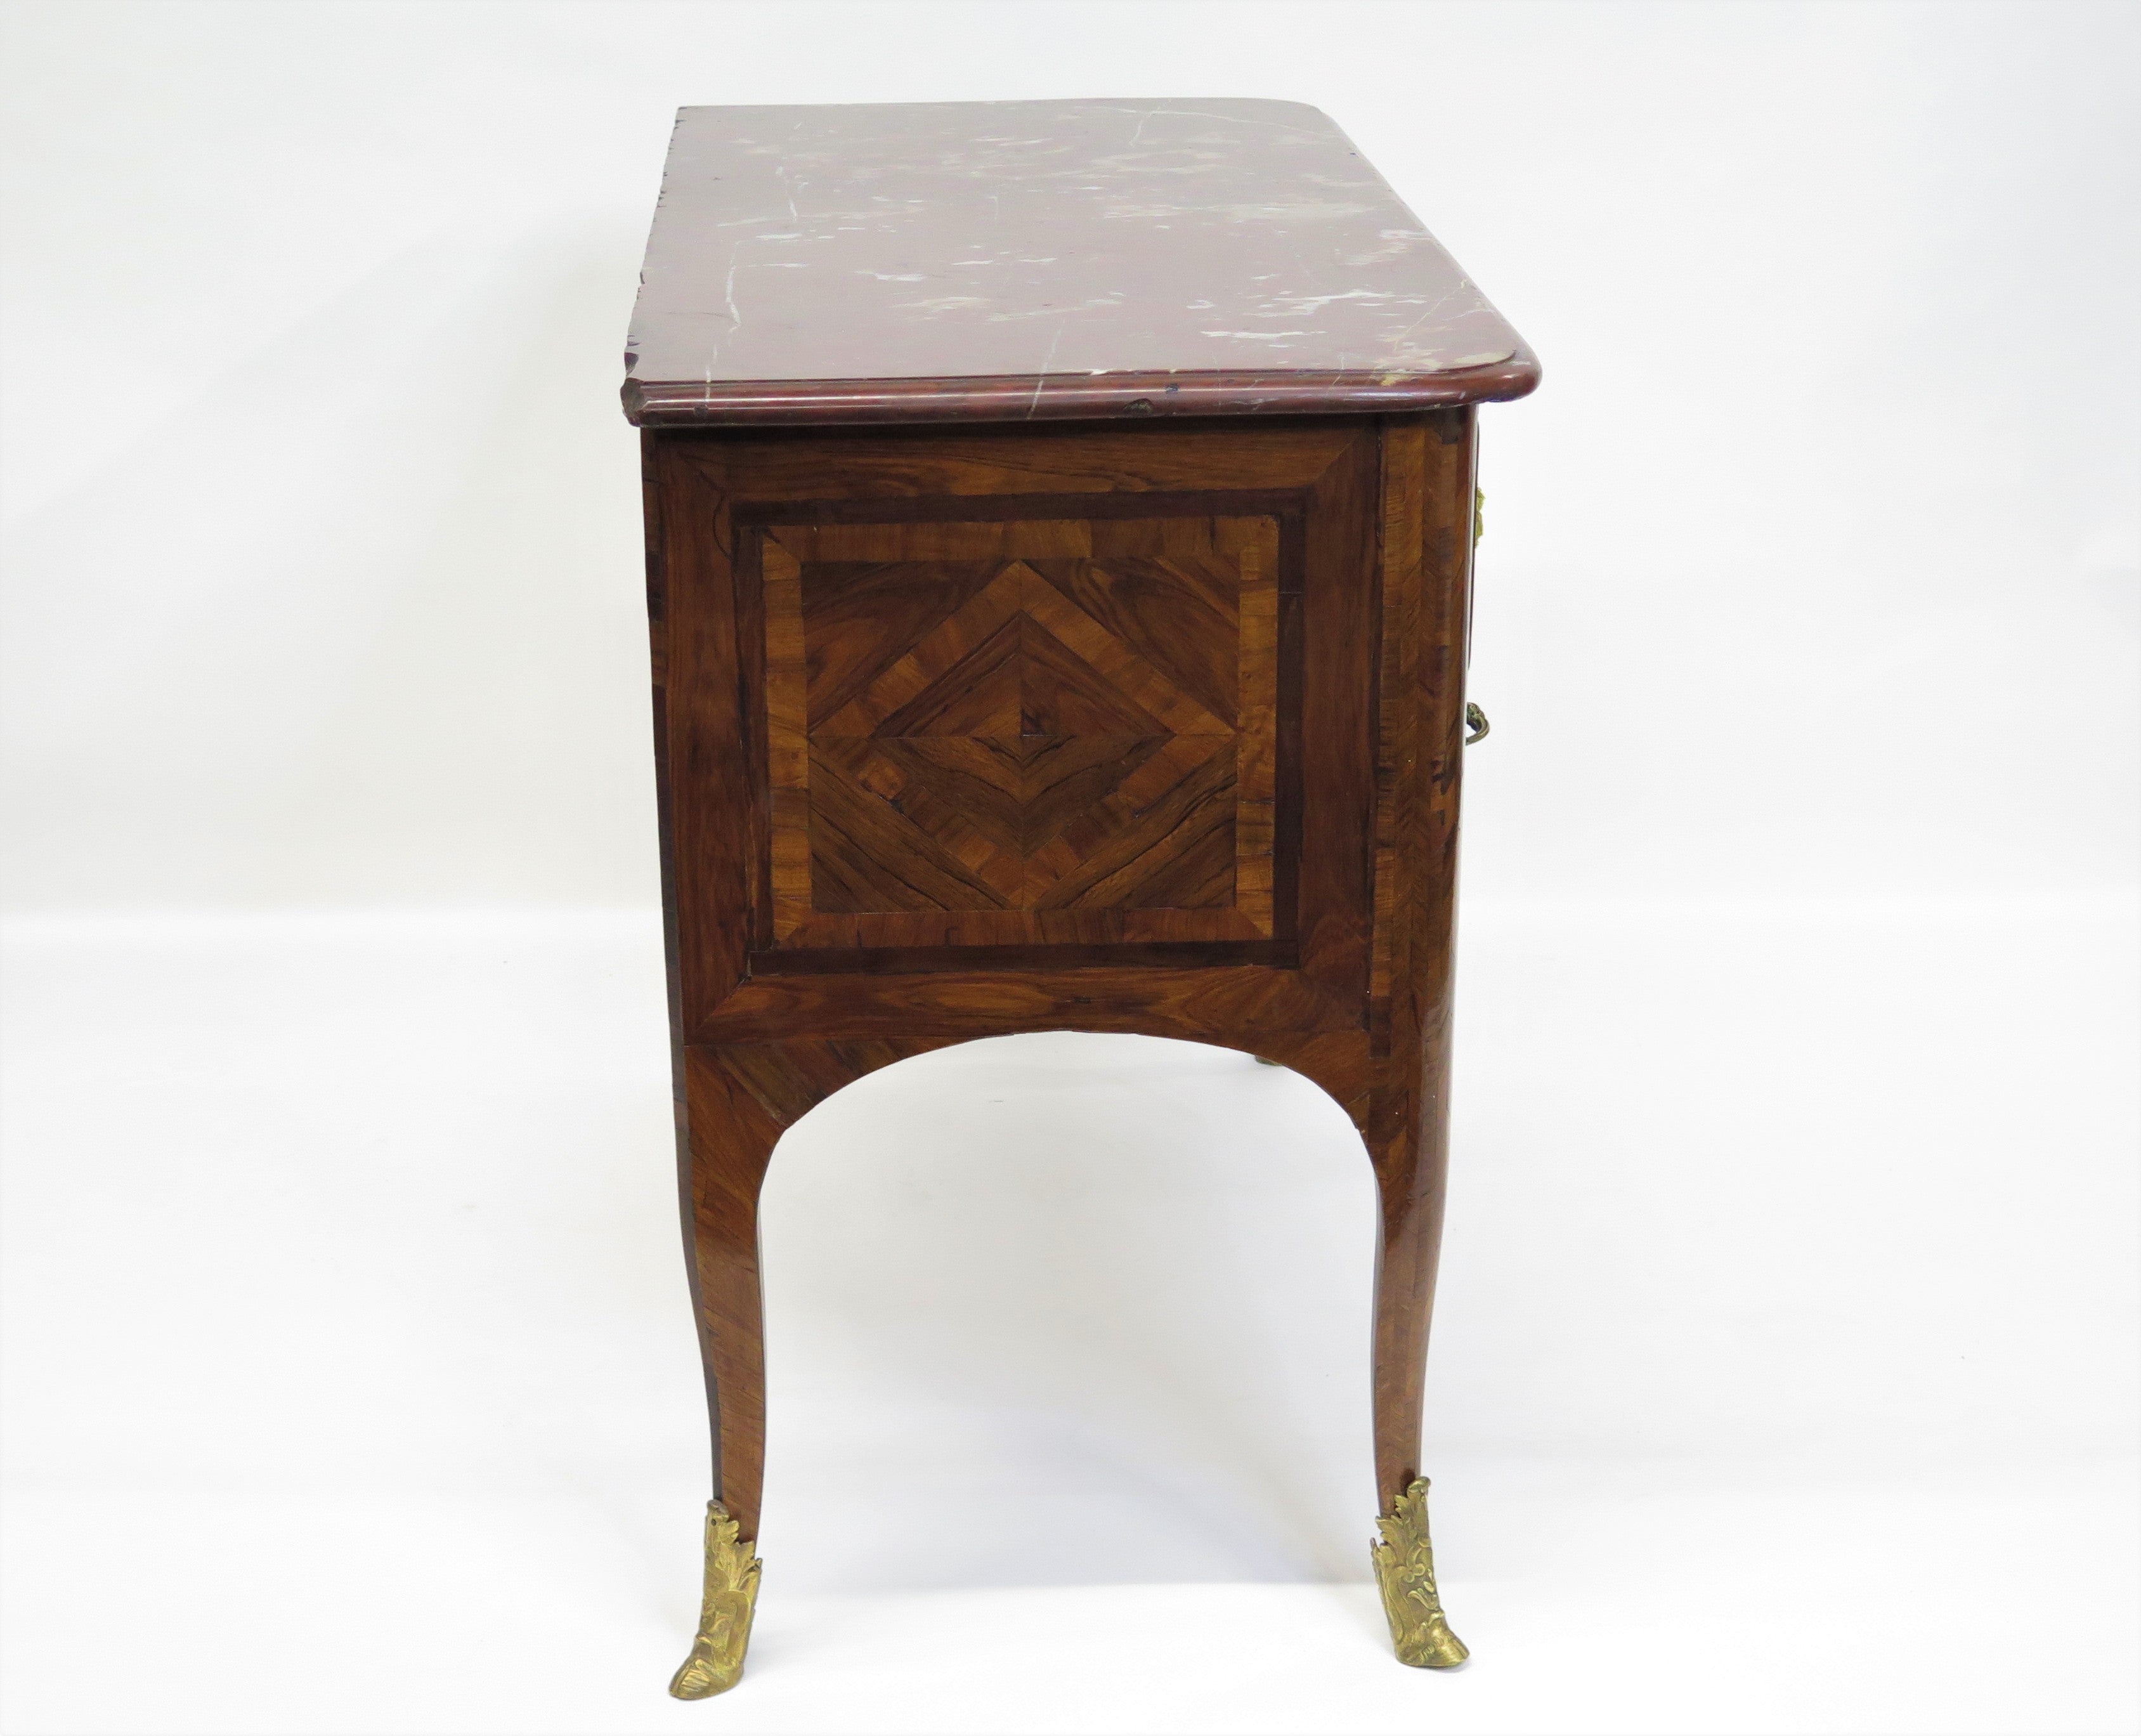 Louis XV 2-Drawer Commode with Marquetry Decoration Reddish Marble Top Having Grey and Tan Veining